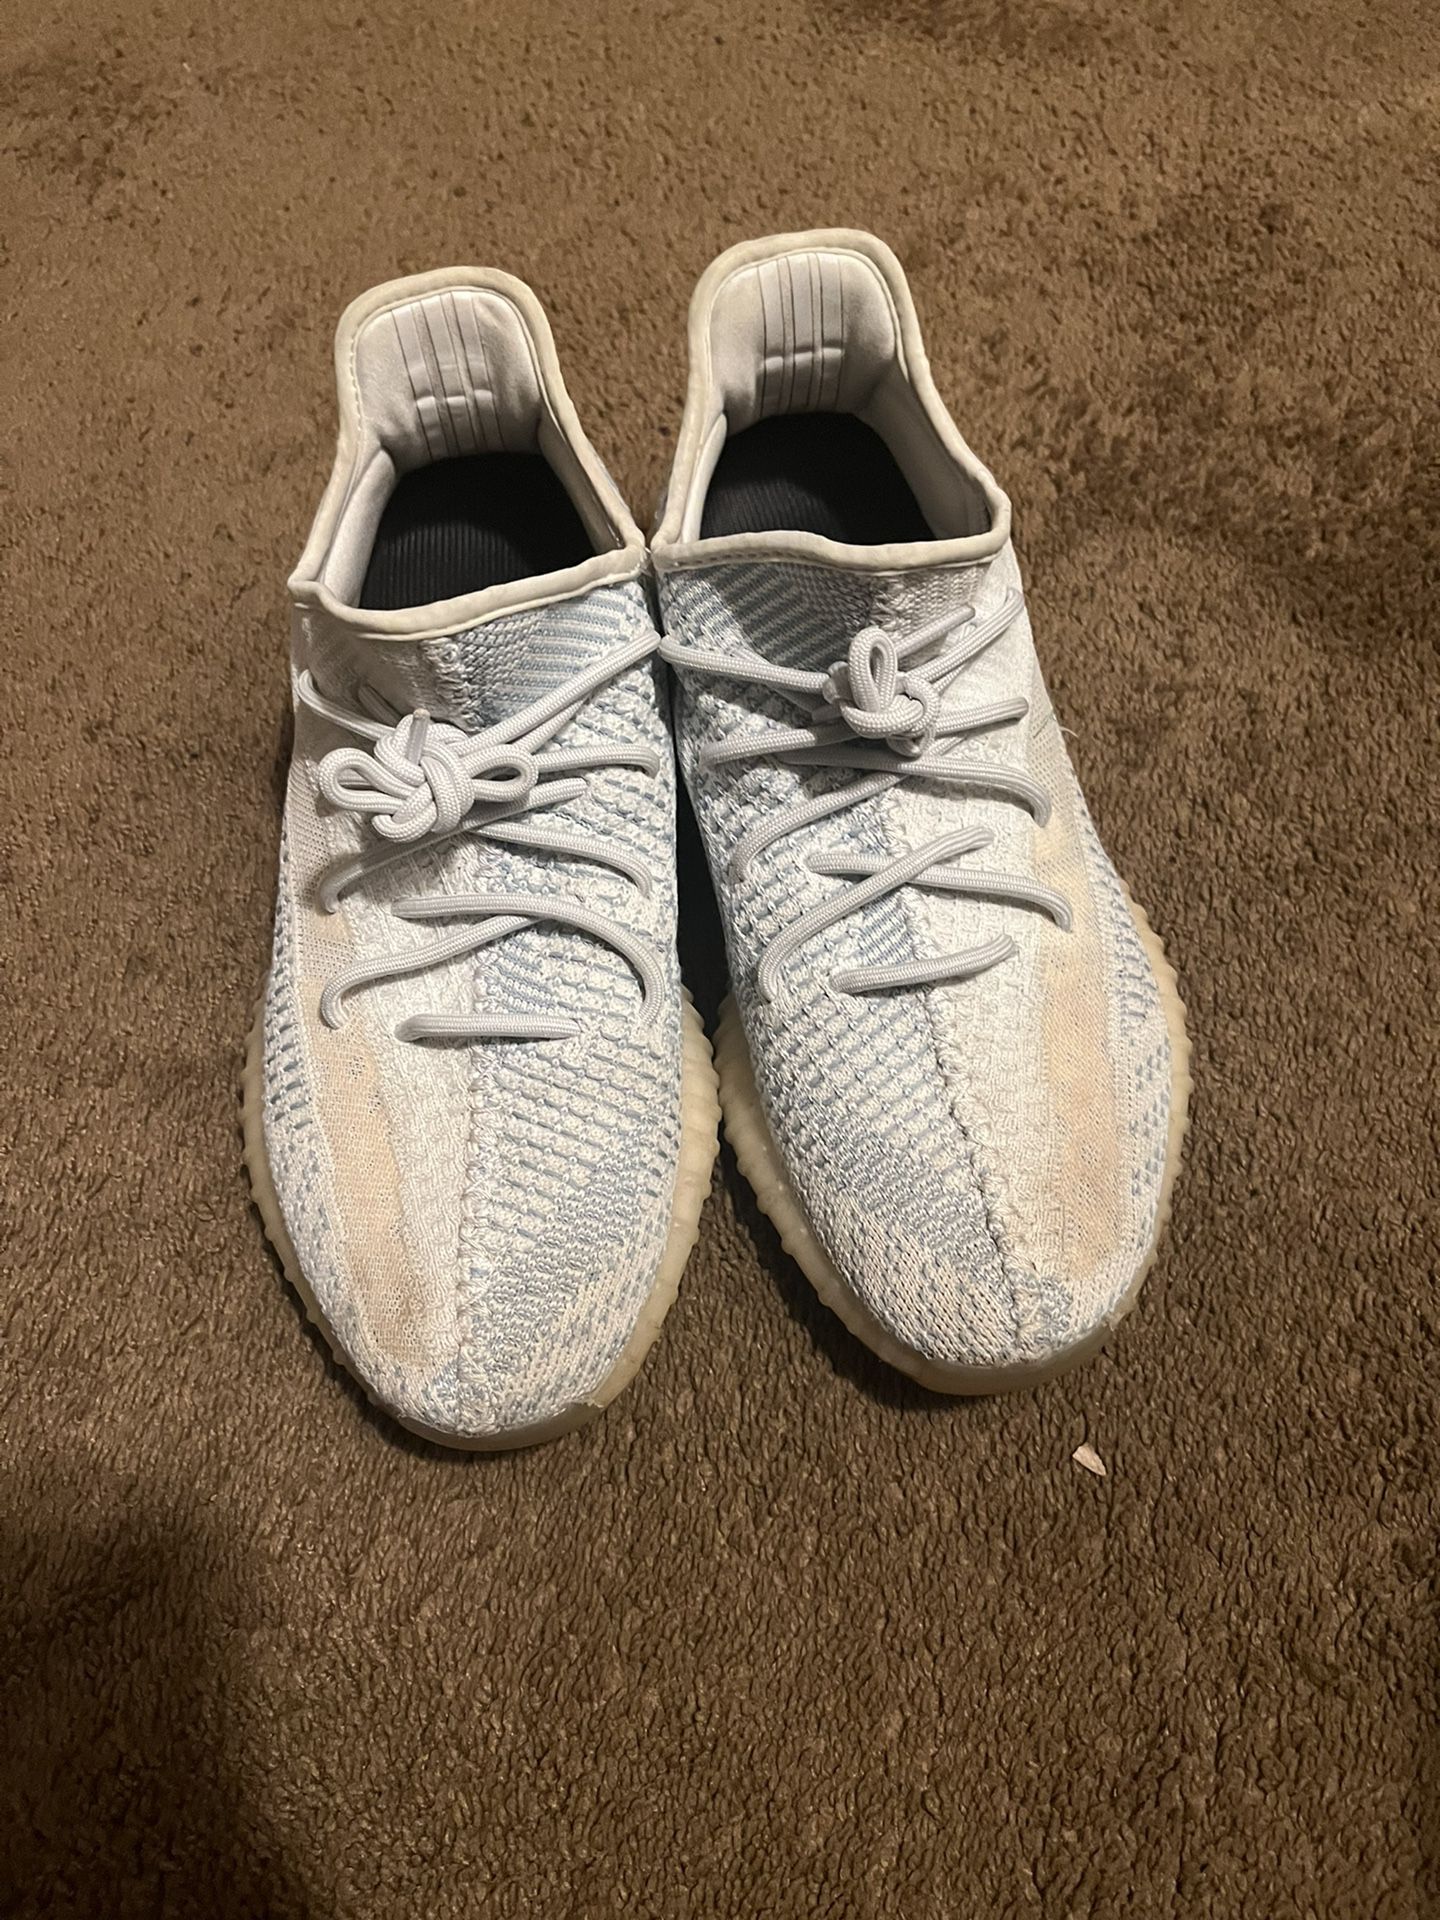 Adidas Yeezy Boost 350 V2 Cloud White (Non - Reflective)